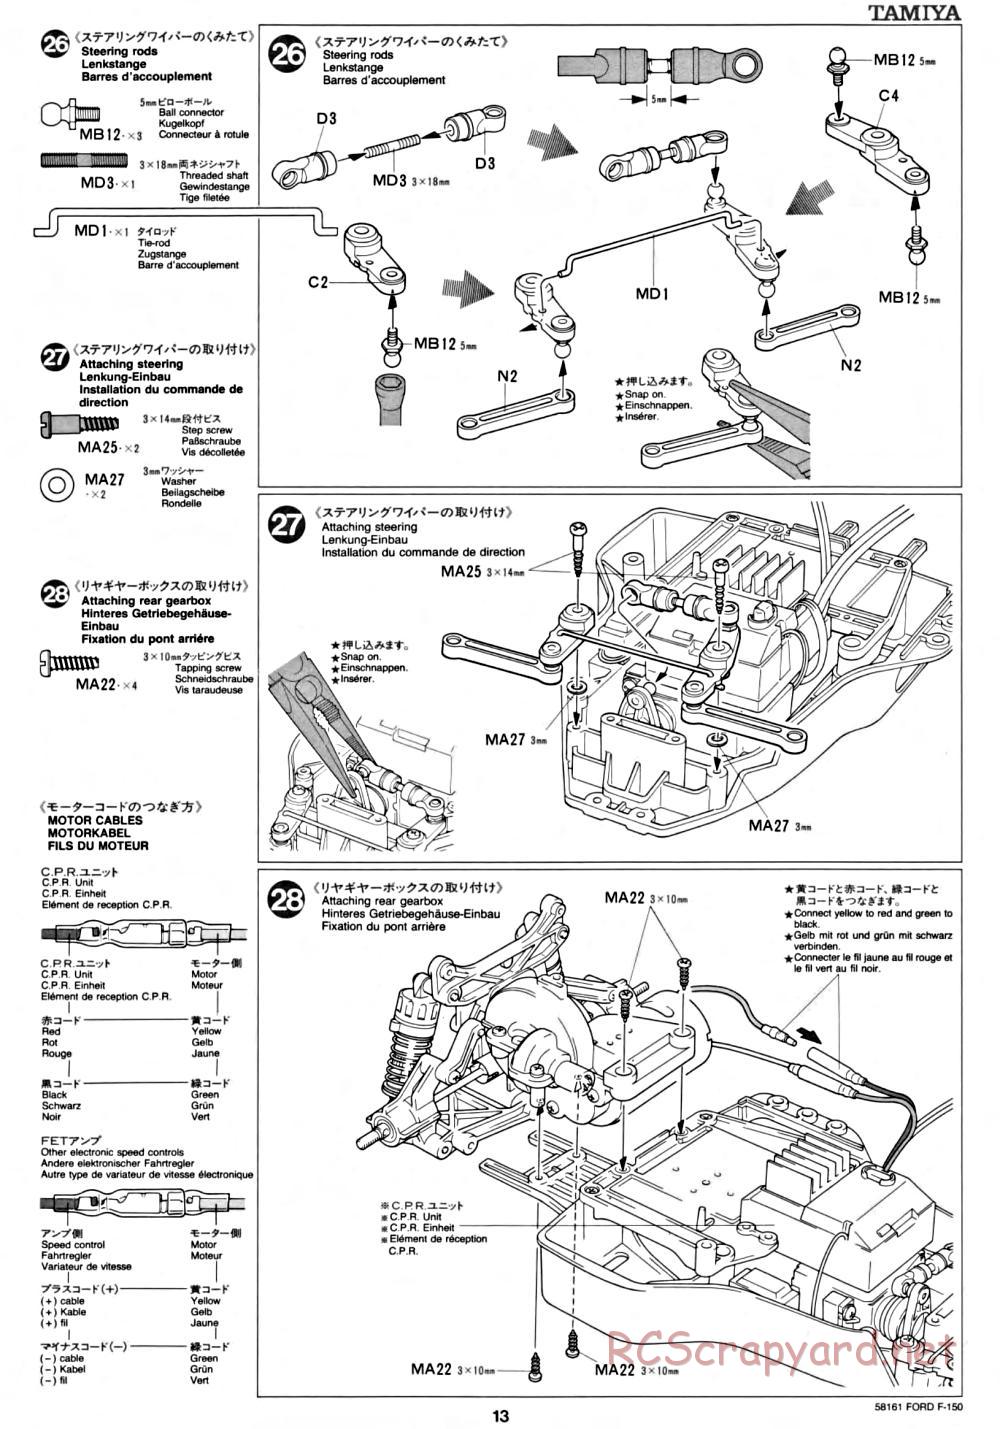 Tamiya - Ford F-150 Truck Chassis - Manual - Page 13